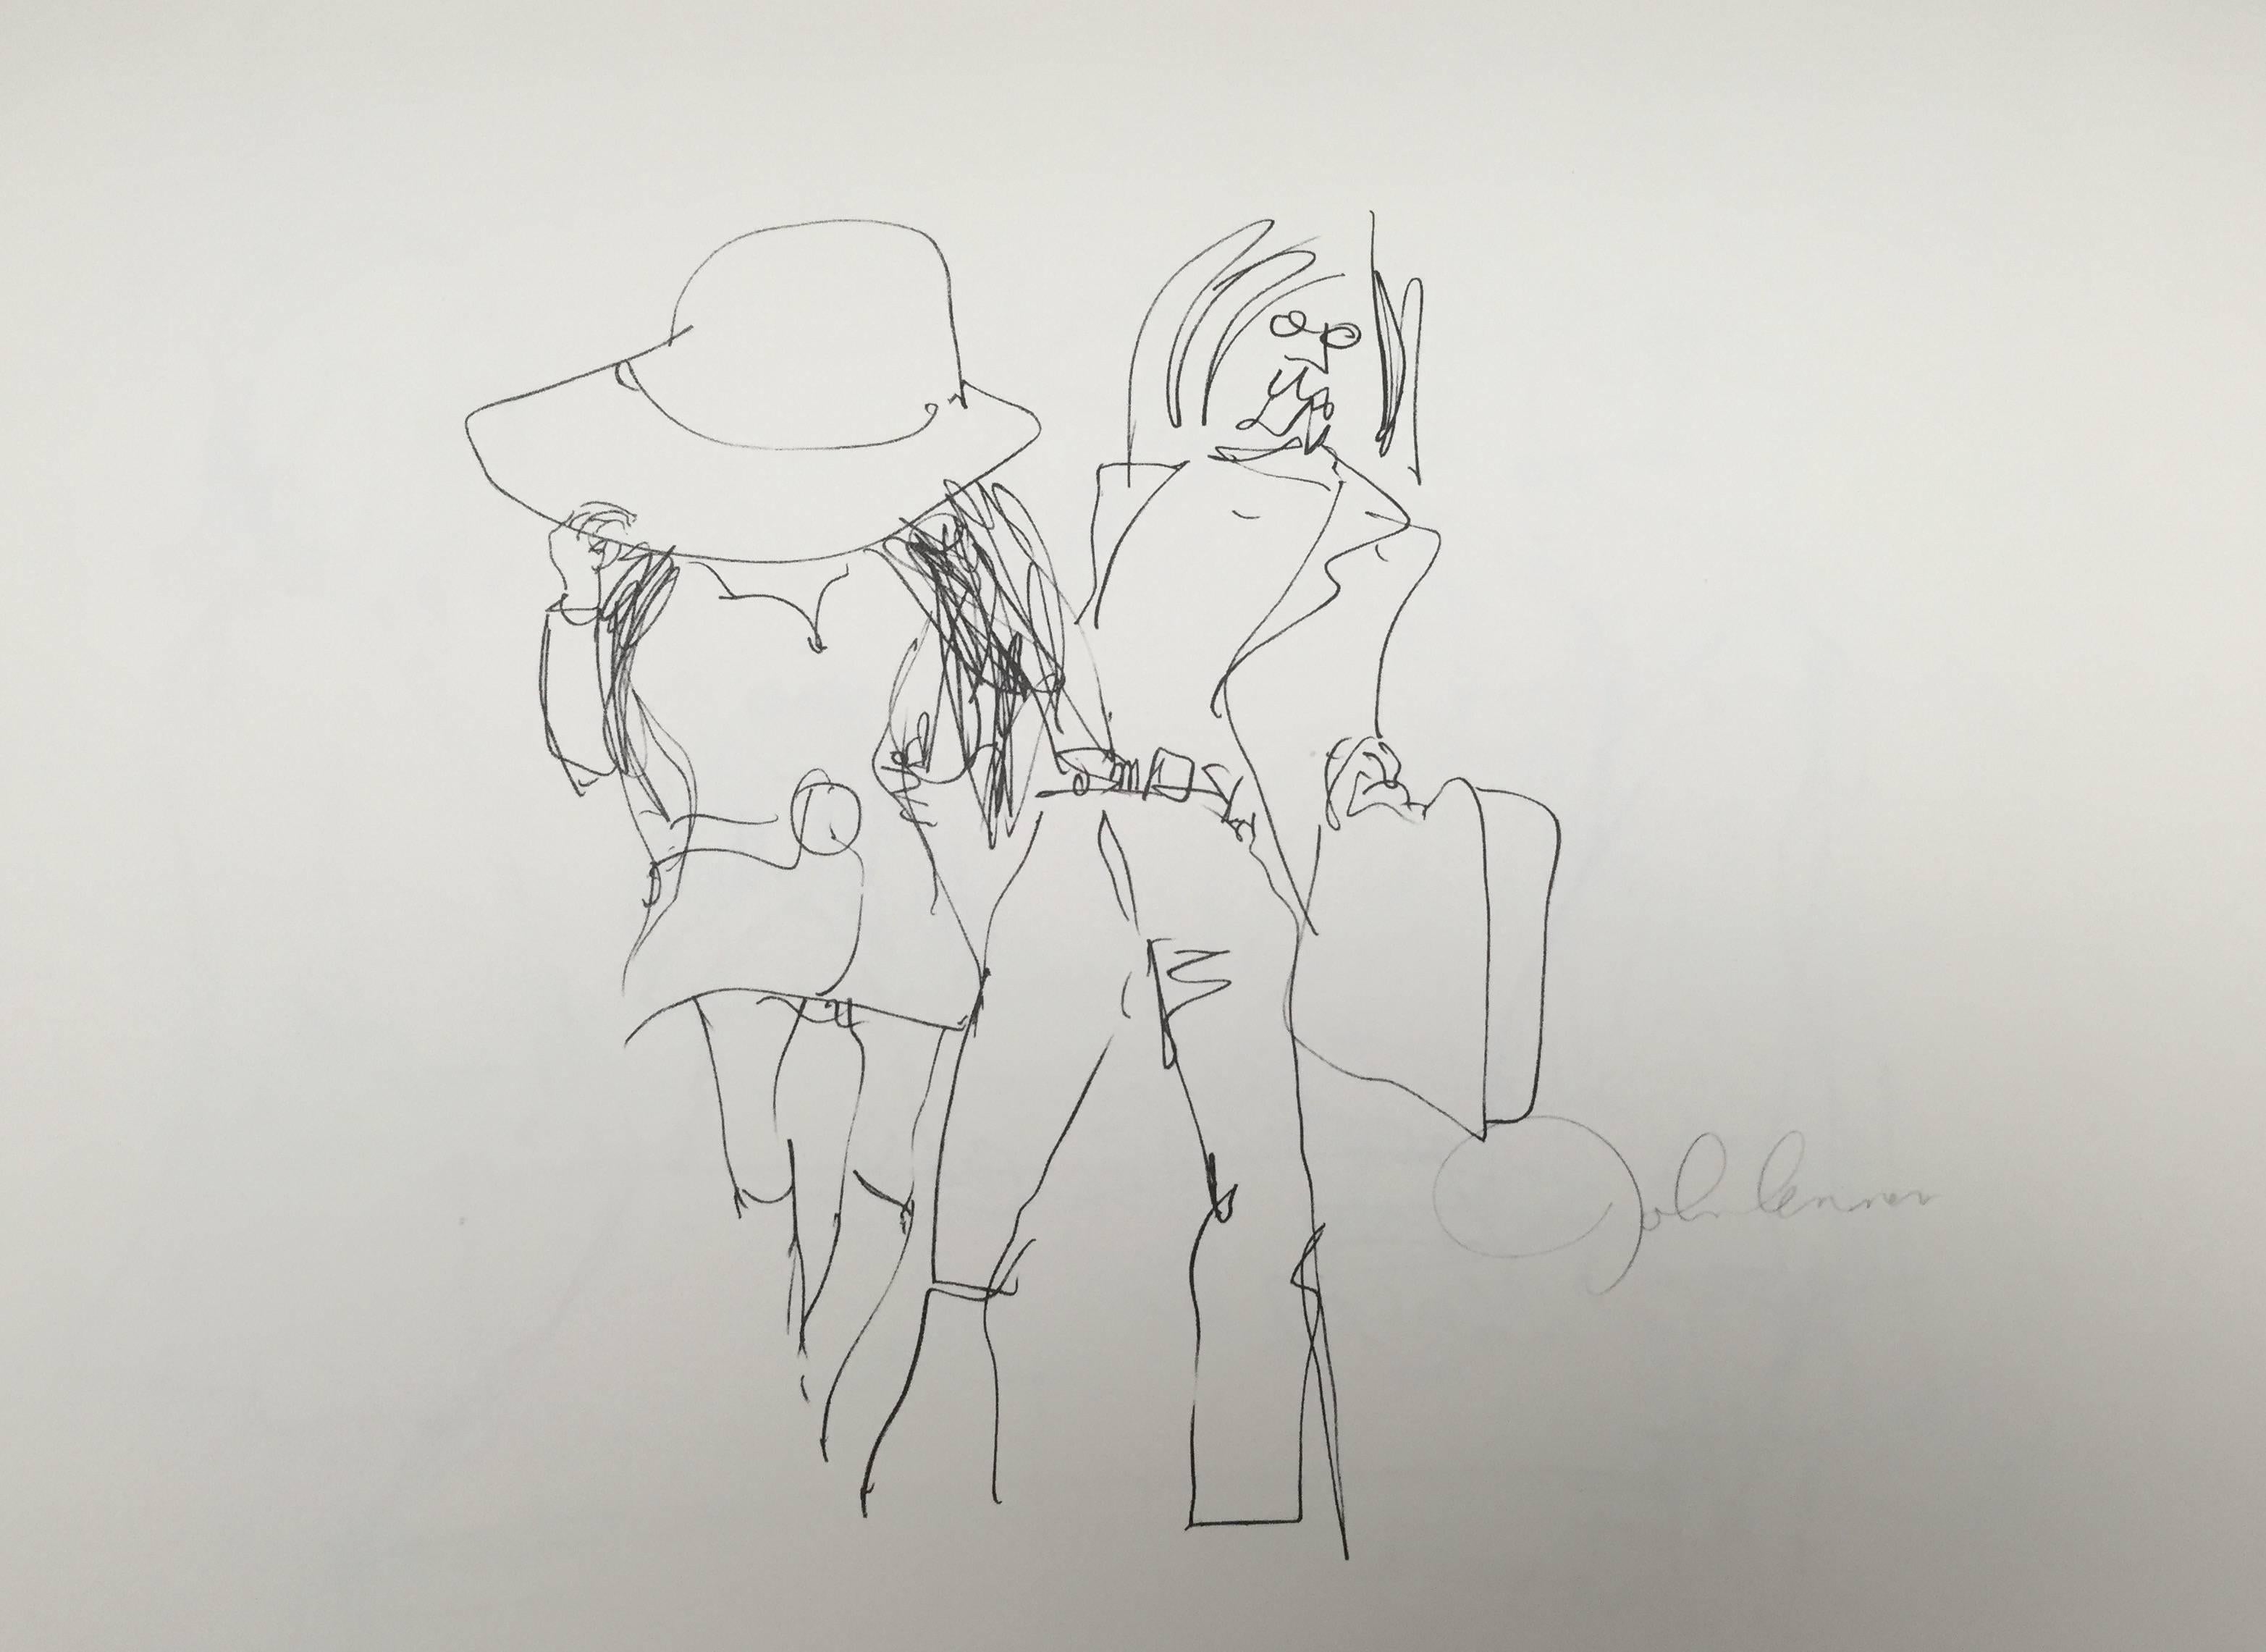 First edition, published by Lee Nordness Galleries, 1970.

The catalogue from an exhibition of lithographs by John Lennon. The drawings are mostly of John and Yoko, many starting to show Lennon's signature line drawing style. The exhibition was